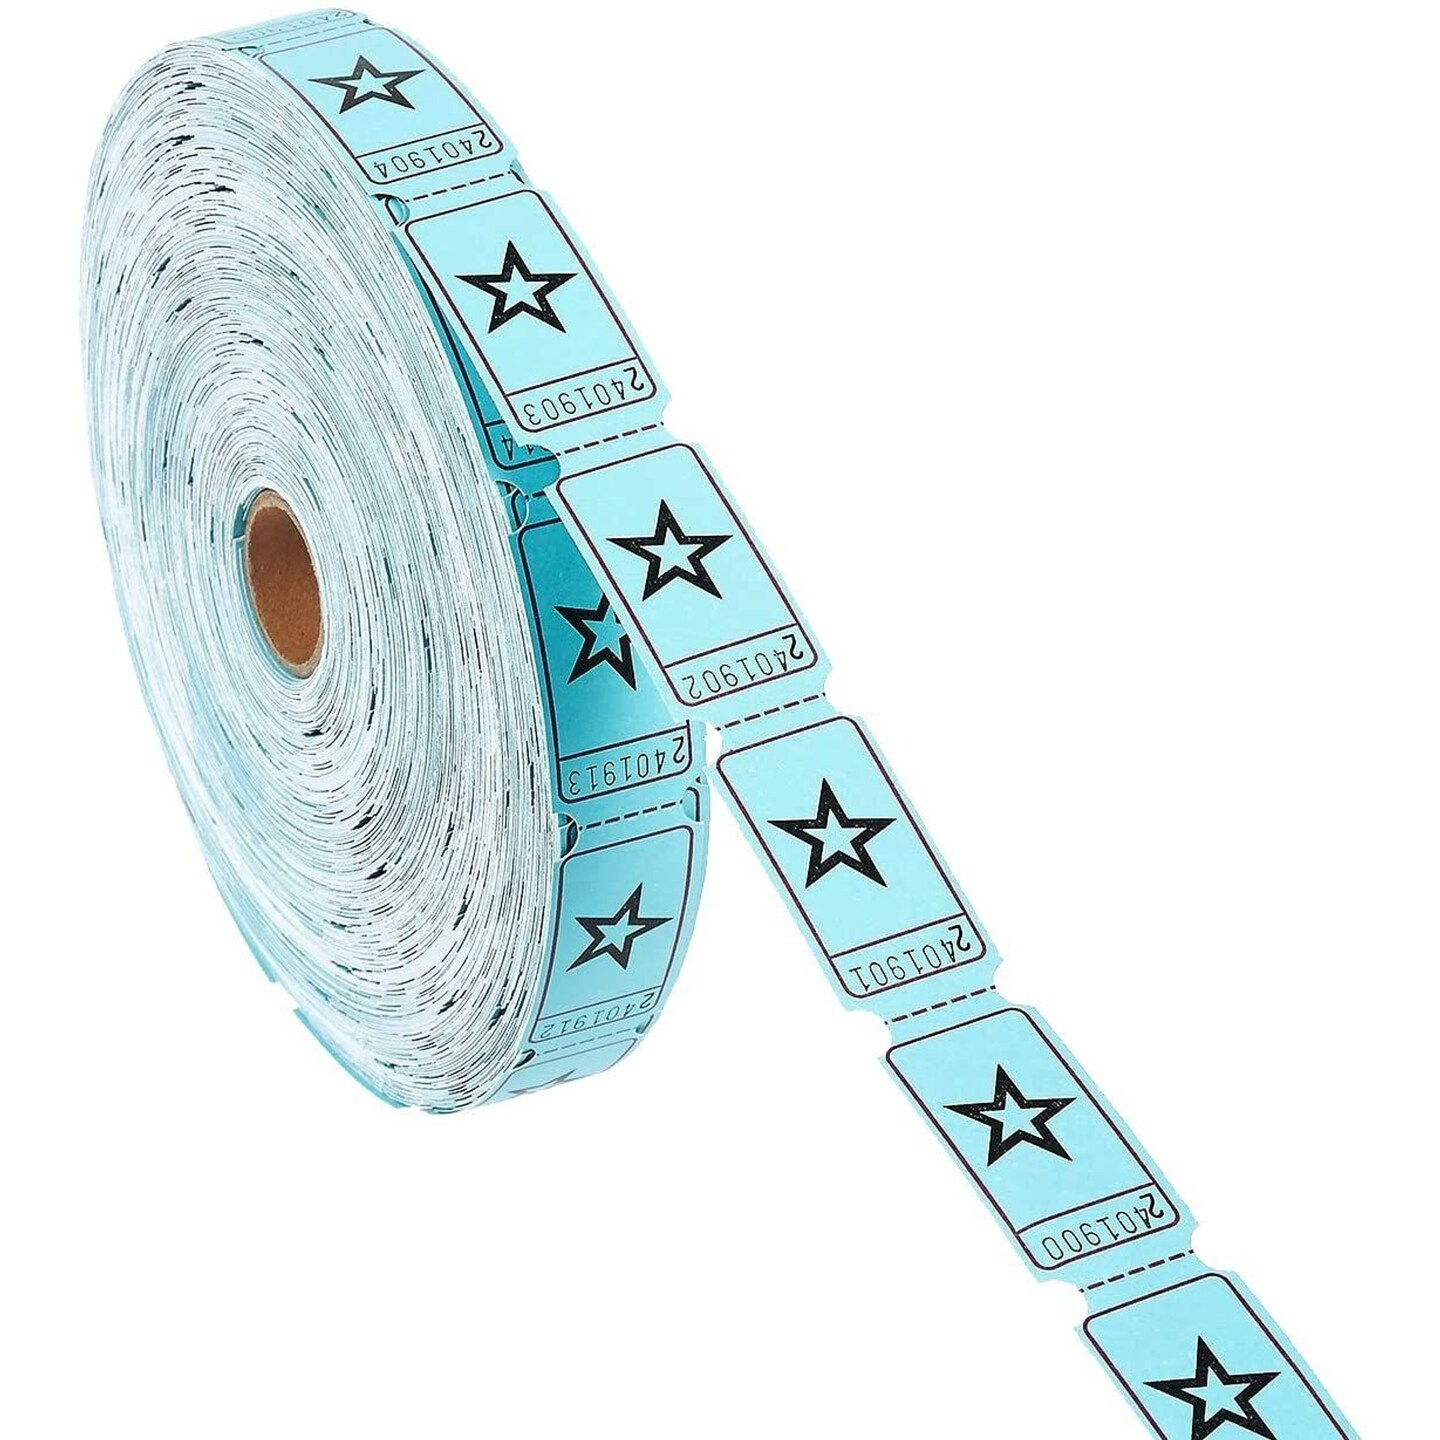 2000 Count Numbered Blue Star Raffle Tickets, Single Roll with Star Design (2 x 1 In)